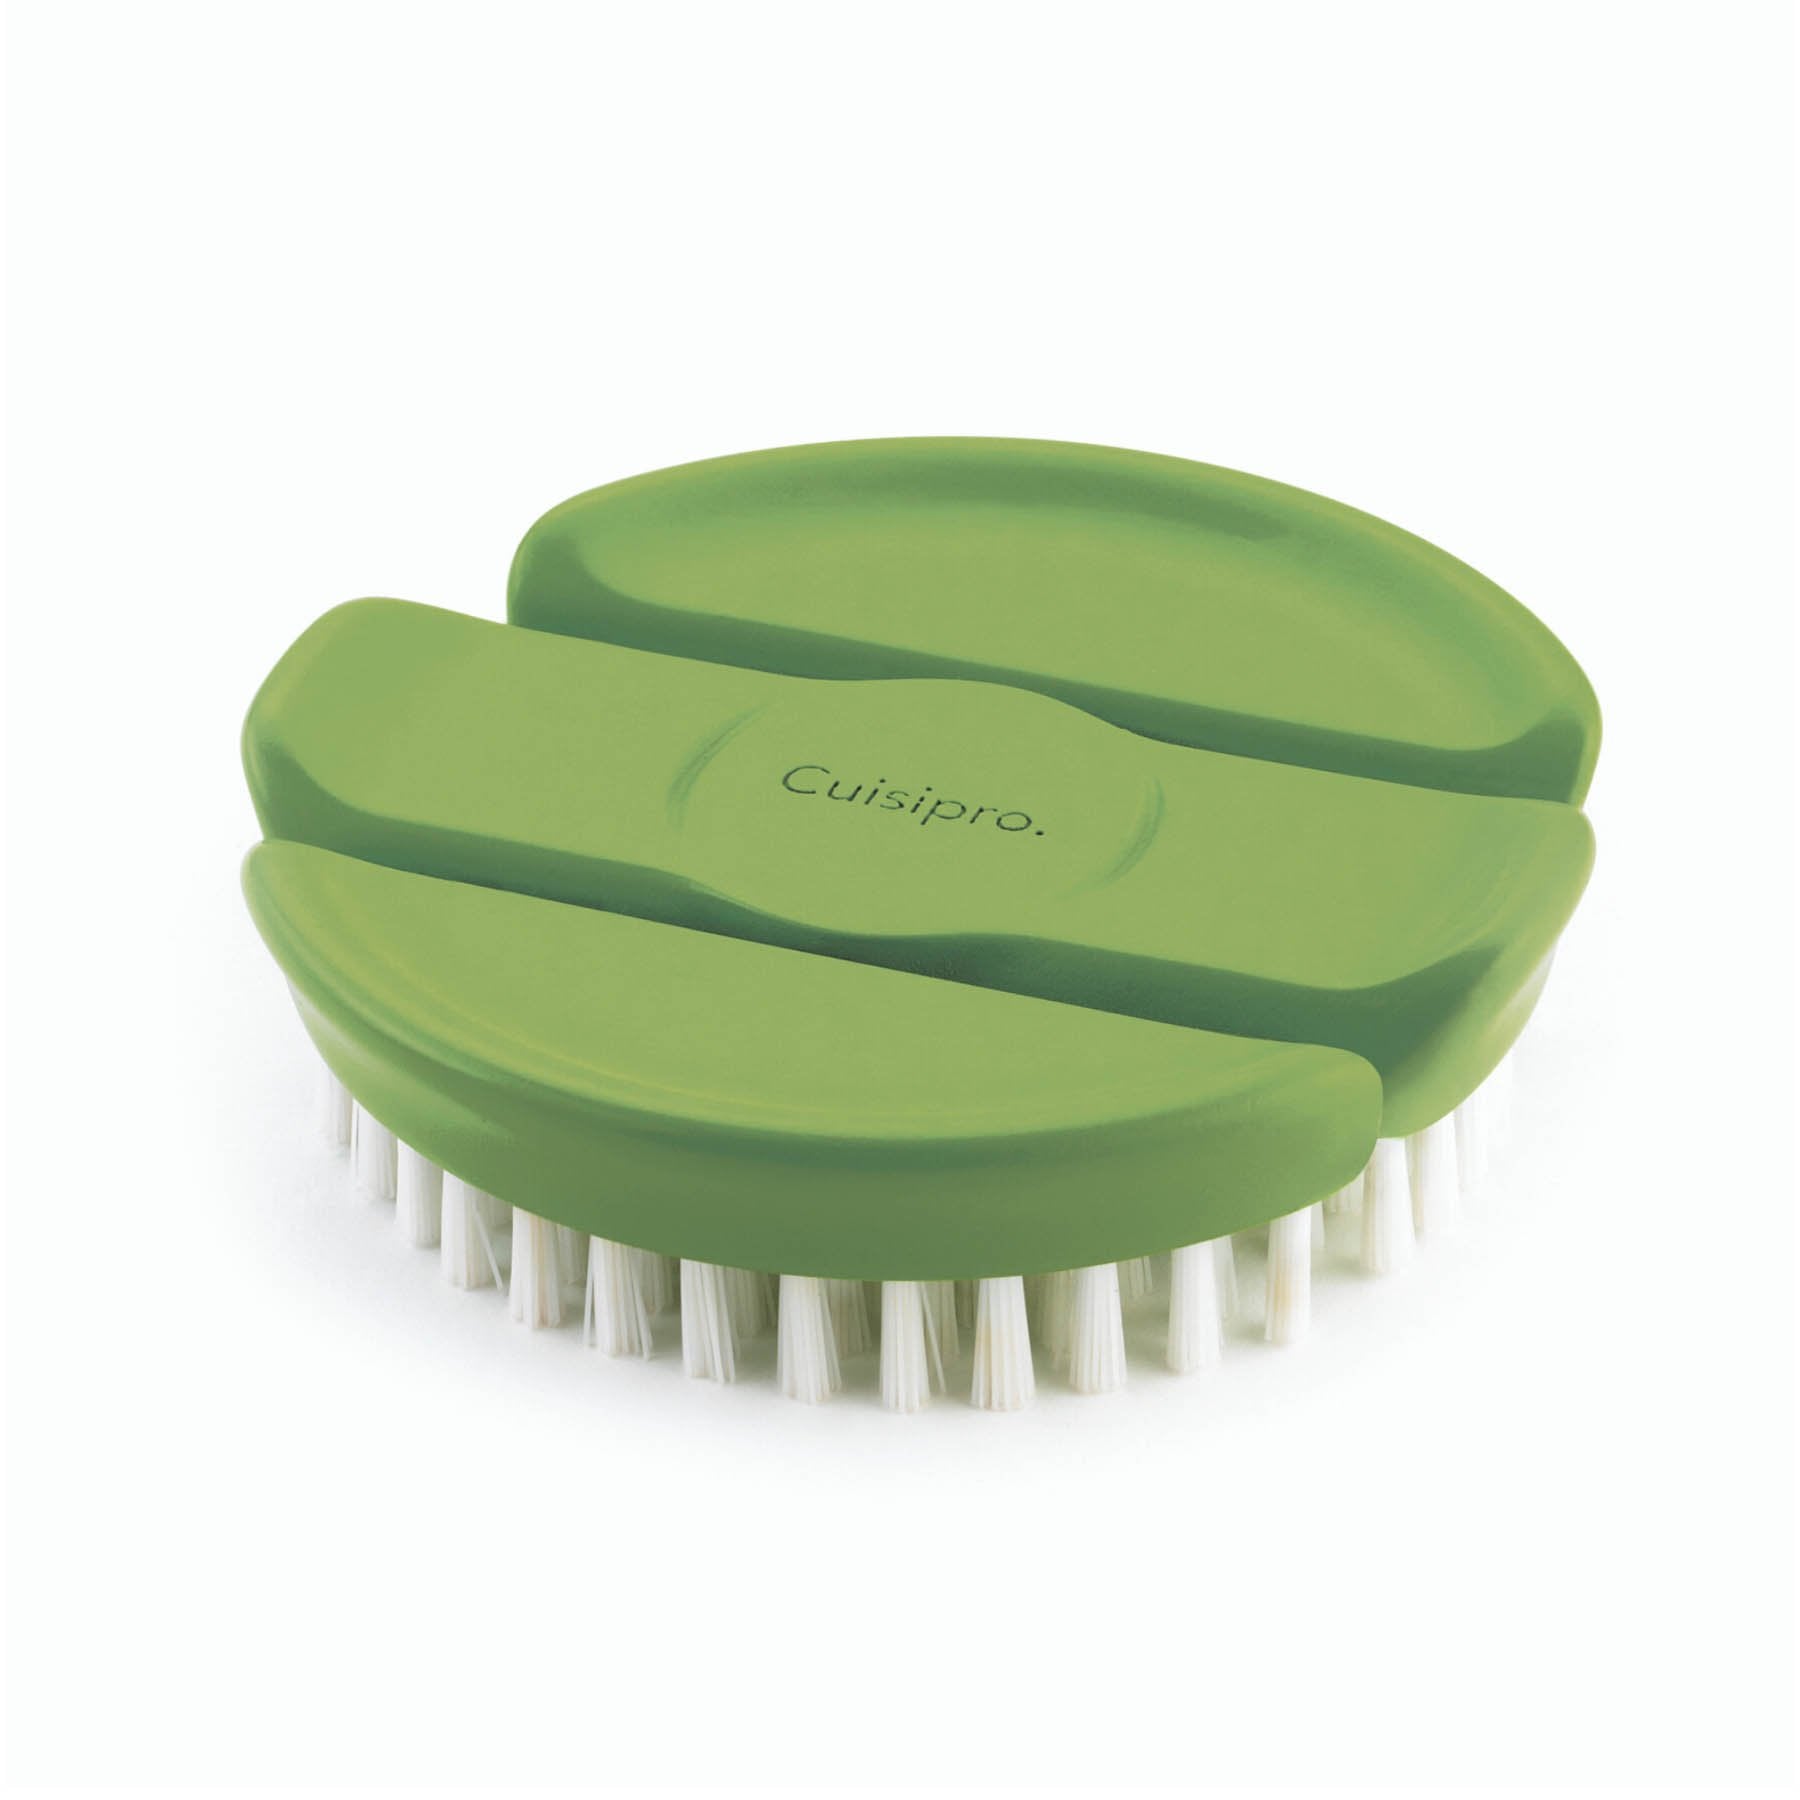 Vegetable Cleaning Brush 2 Pack 3.5(1 Soft/1 Hard) by Cuisipro